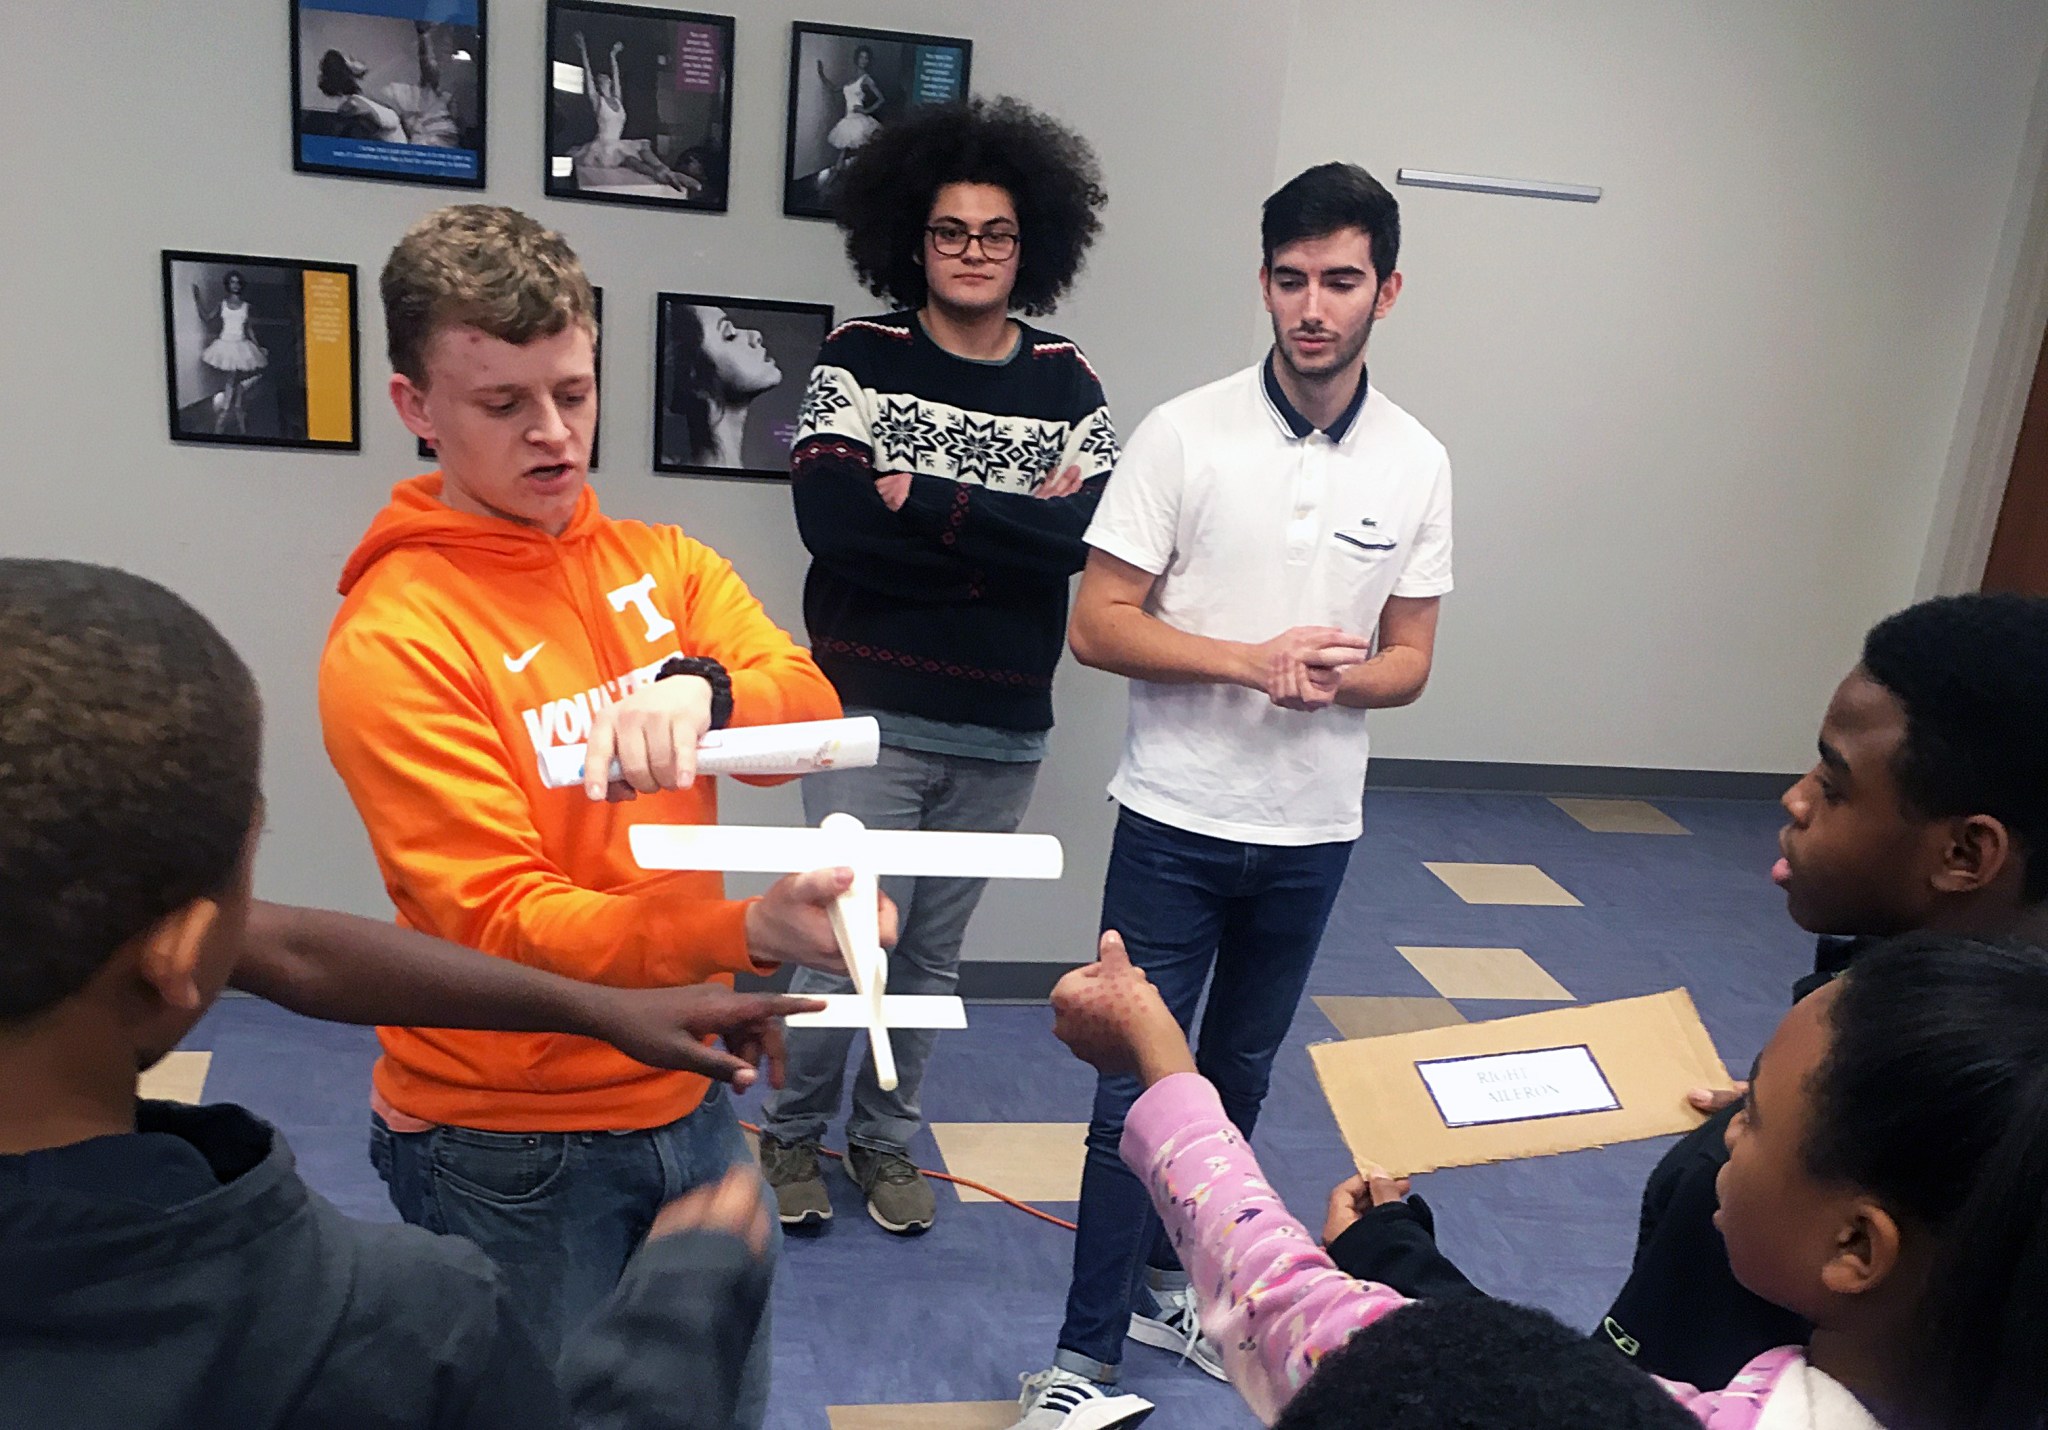 A college student holds a model airplane while talking about it with some high school students.